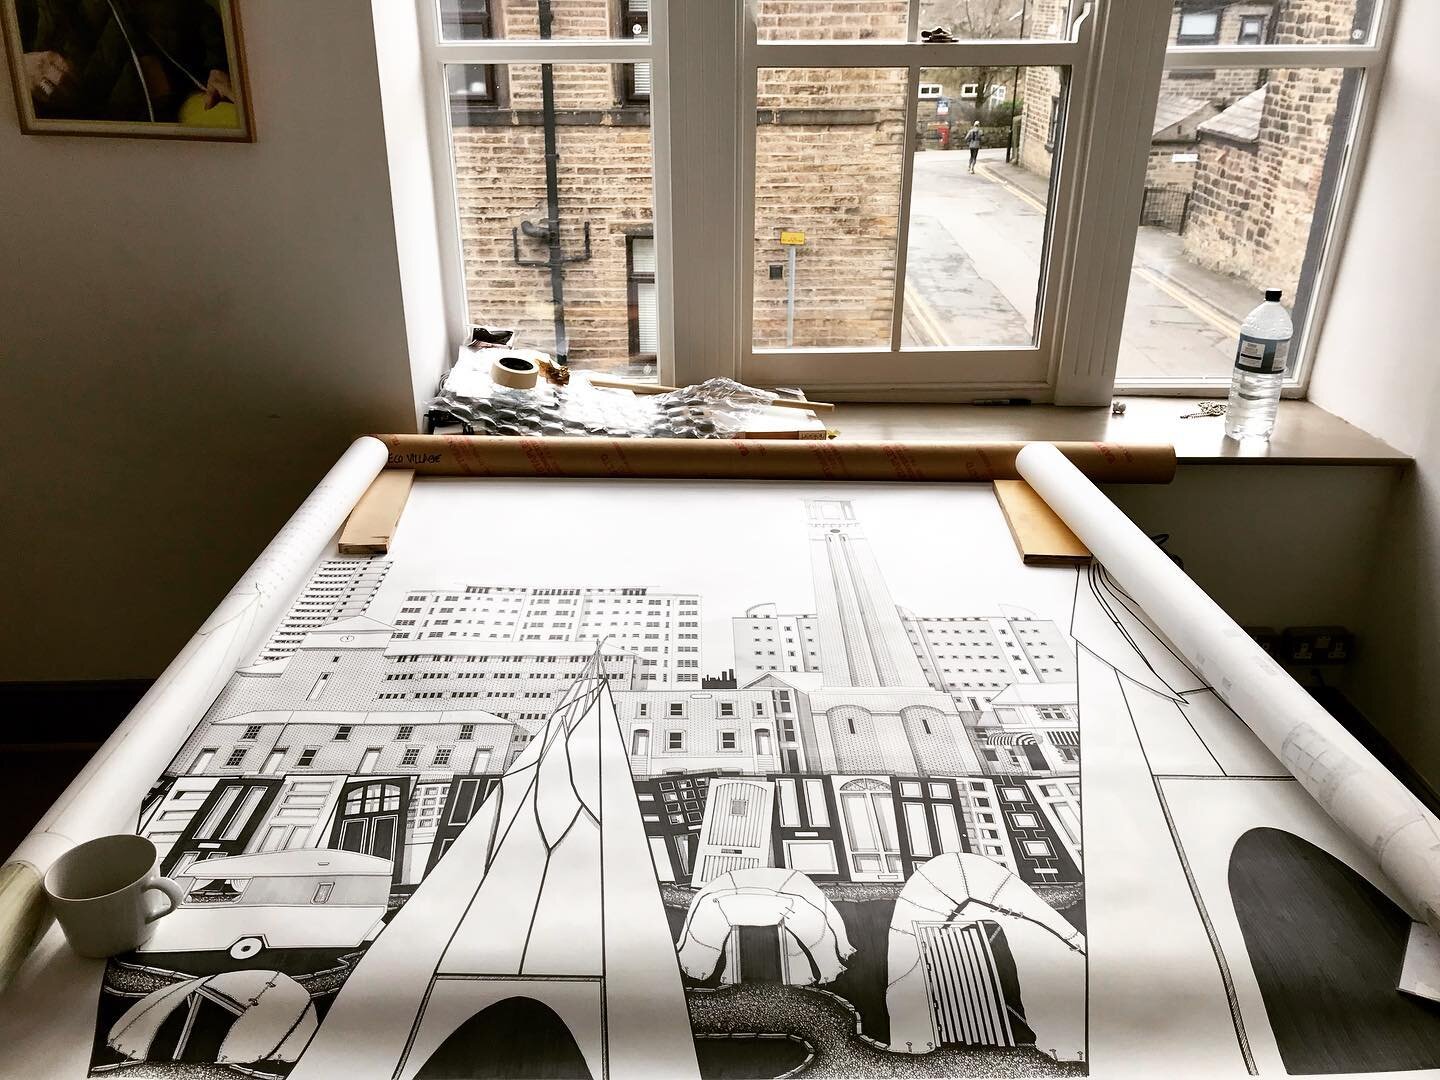 Unwrapping Julian&rsquo;s XXL drawings of #london for the first time in 10 years, we&rsquo;ve forgotten how intricate and beautiful they are. We&rsquo;ve sold most of them in the #artauction but we still have these 4 left&hellip;

1. Kew Eco Village 